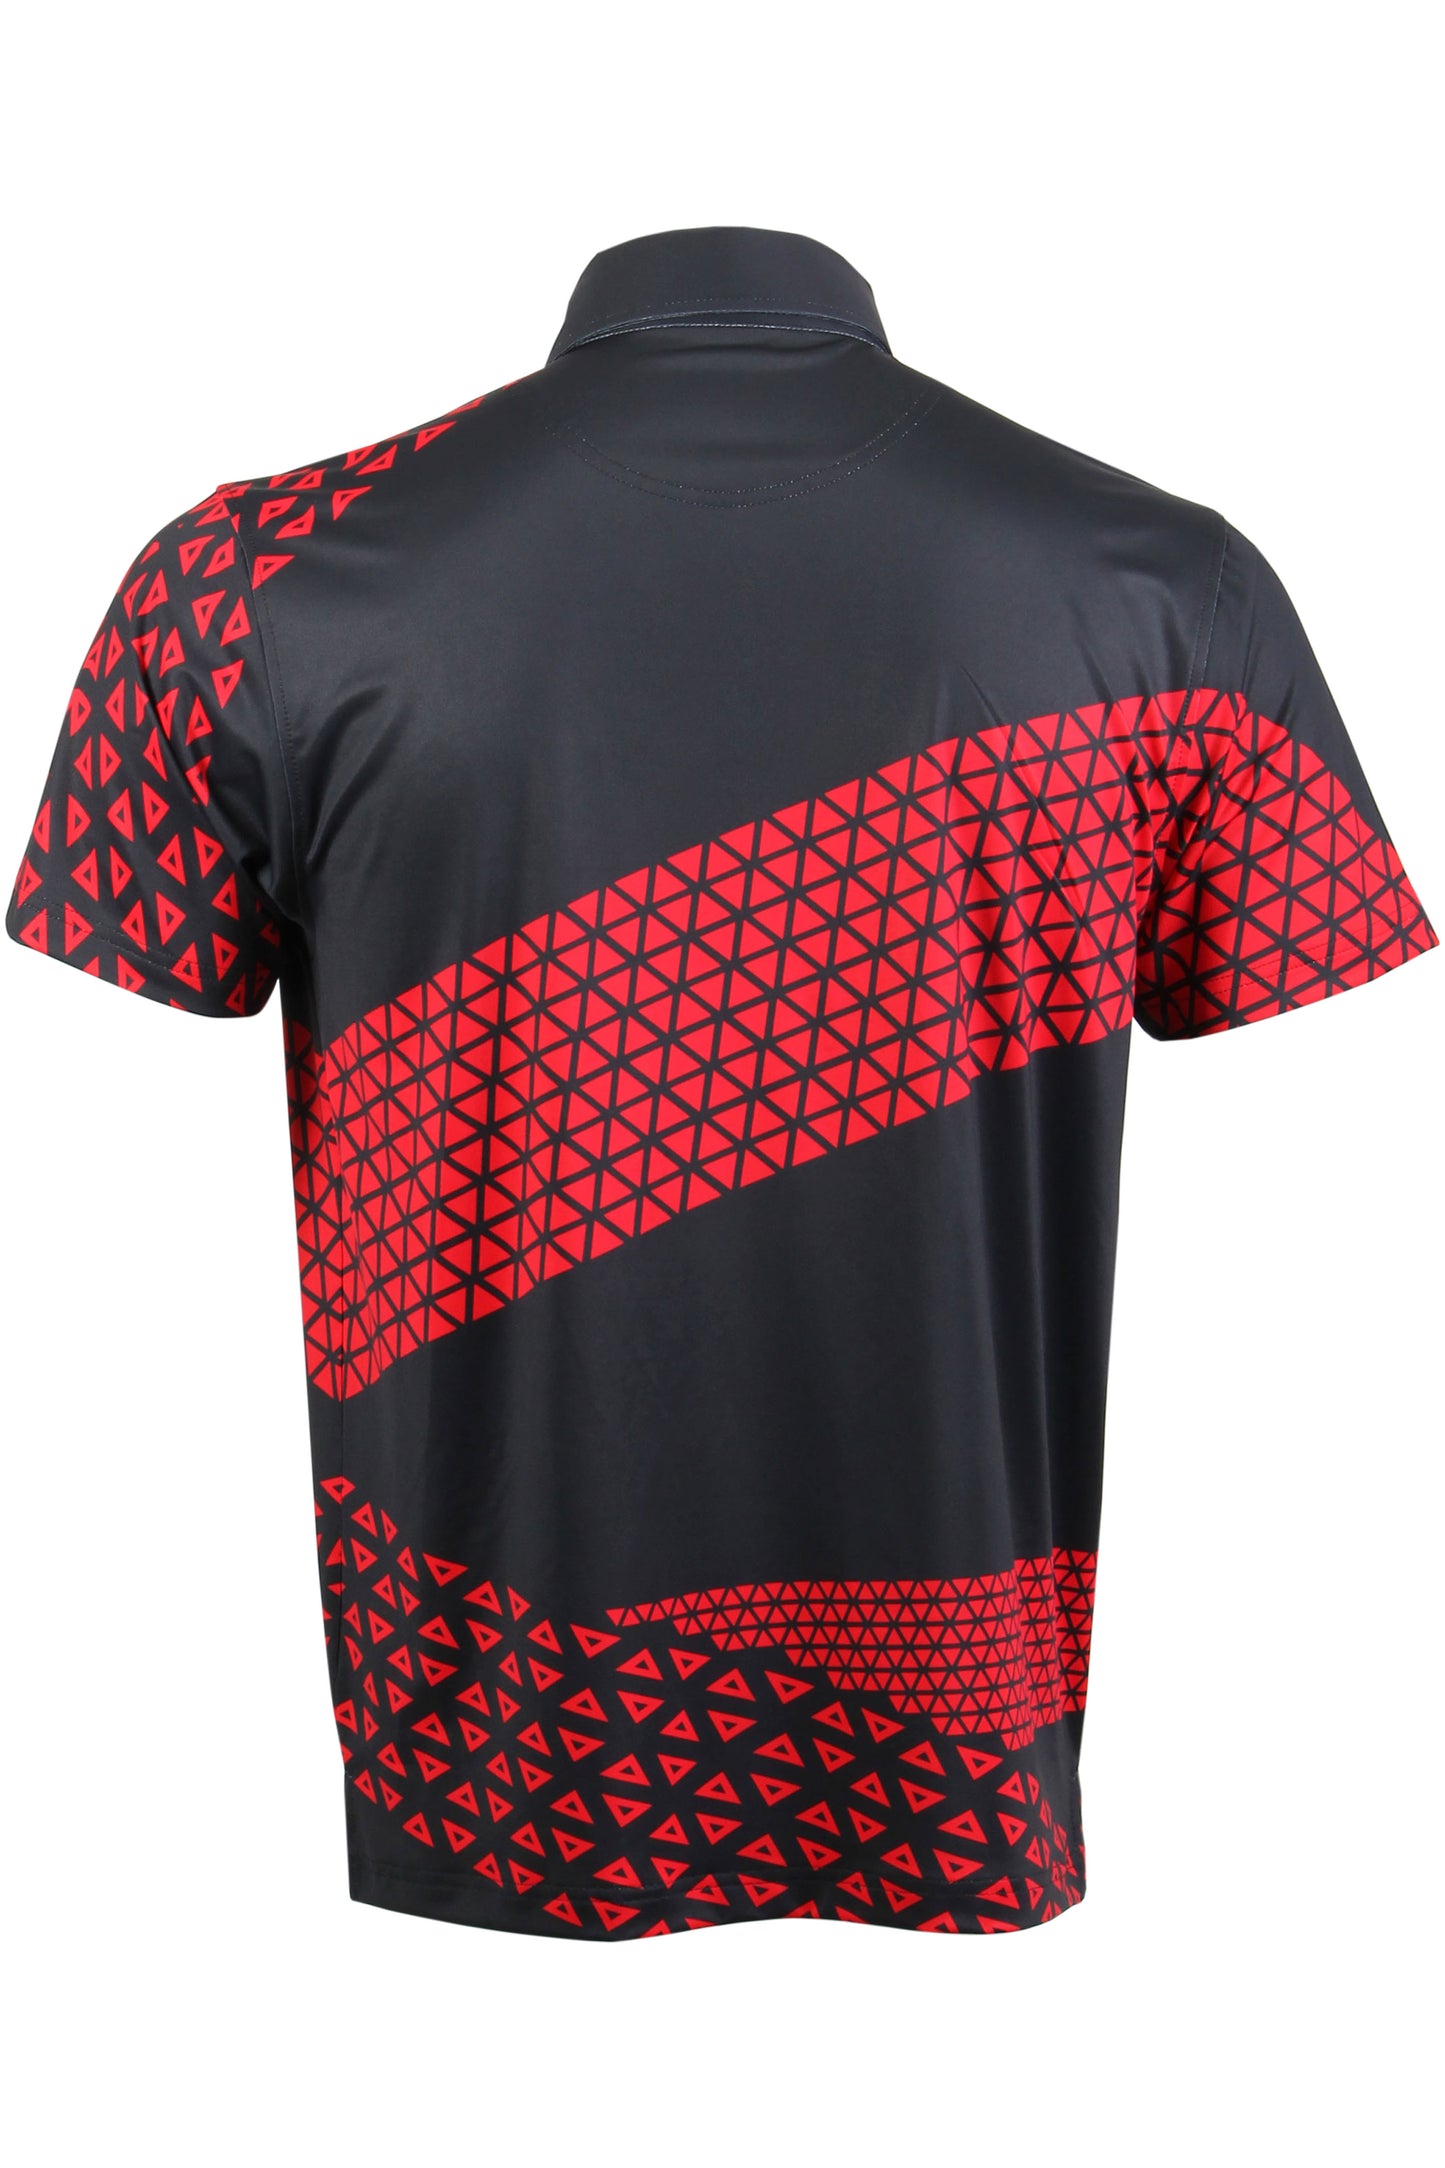 Black and Red Trio Polo